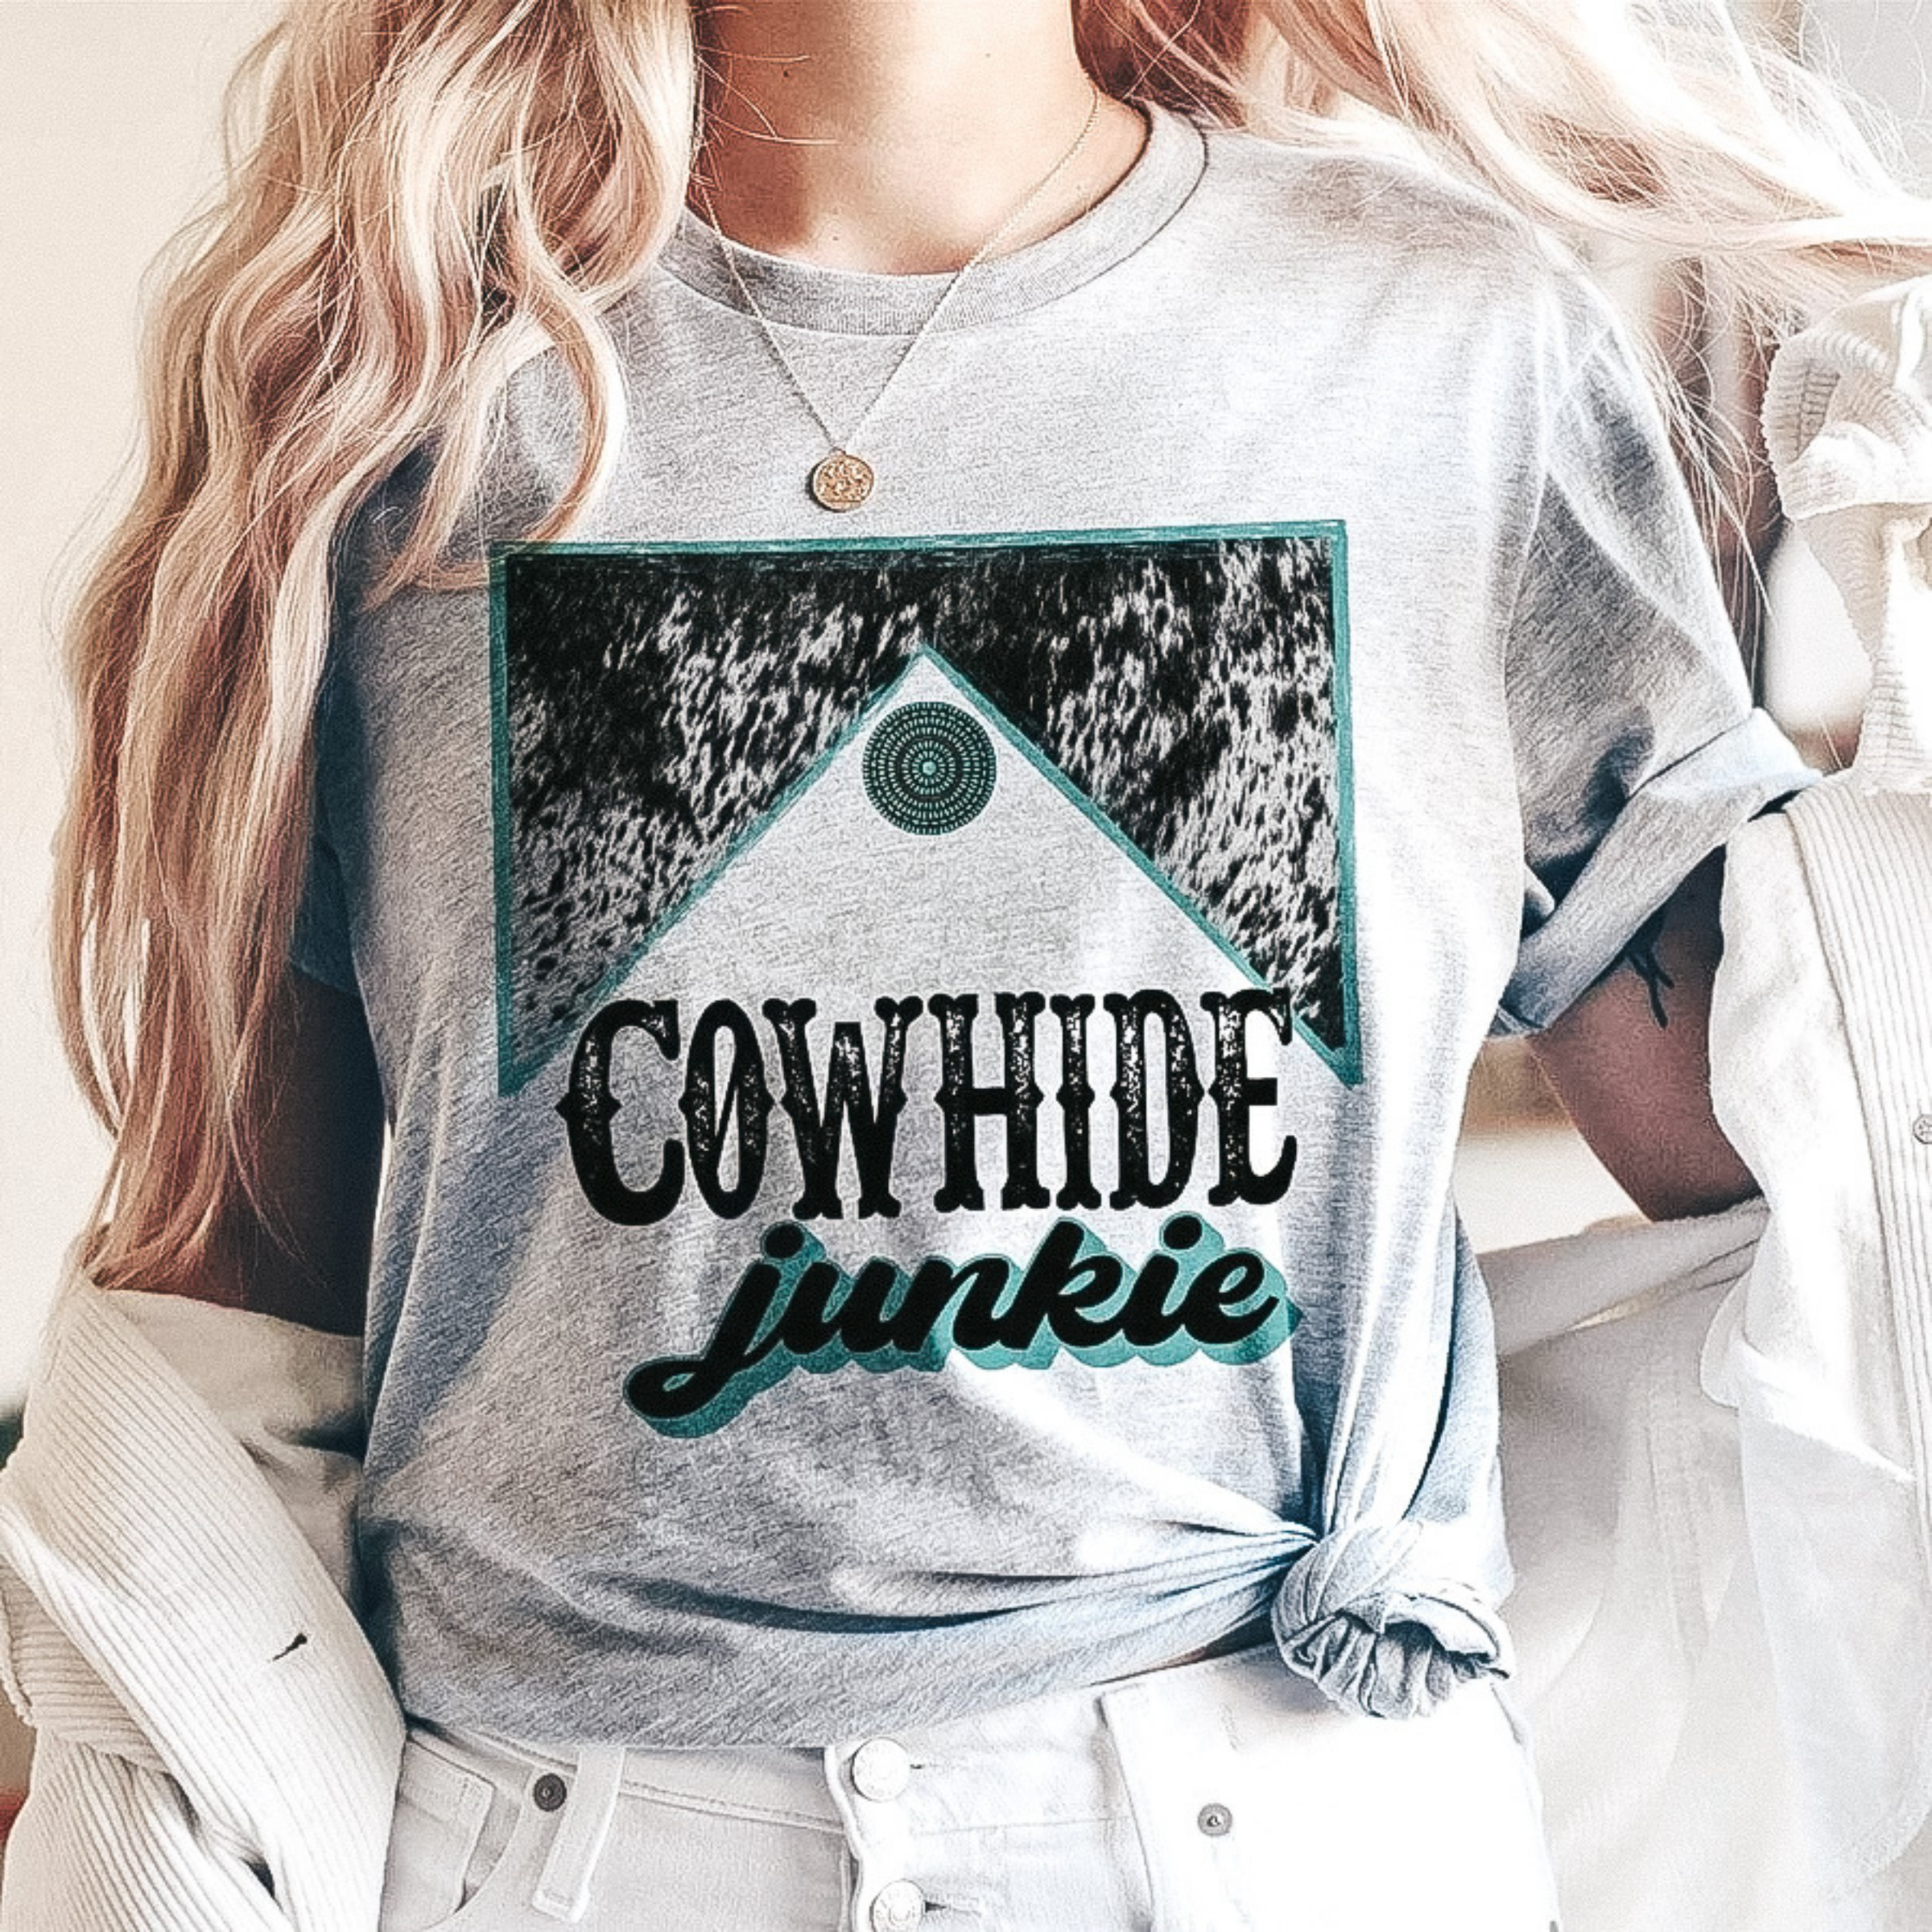 Model is wearing a grey tee shirt that says "Cowhide Junkie" with a turquoise and cowhide graphic. Model has it paired with a white corduroy jacket and white pants.